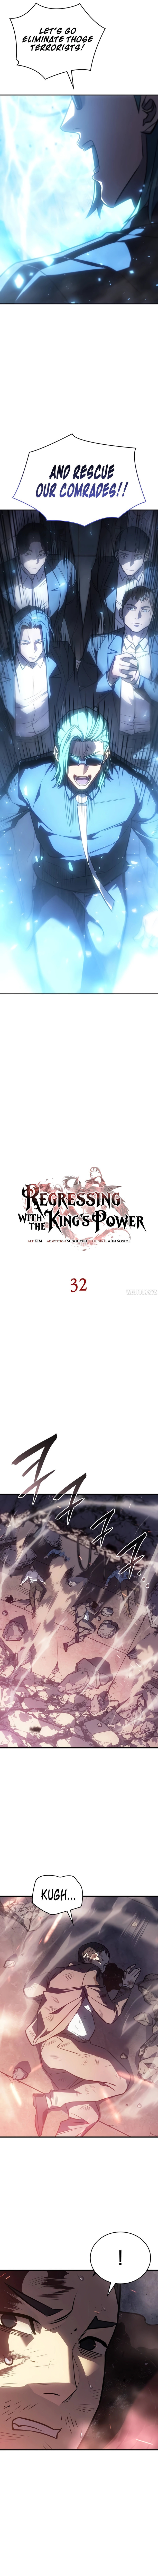 Regressing with the King’s Power - Chapter 32 Page 7